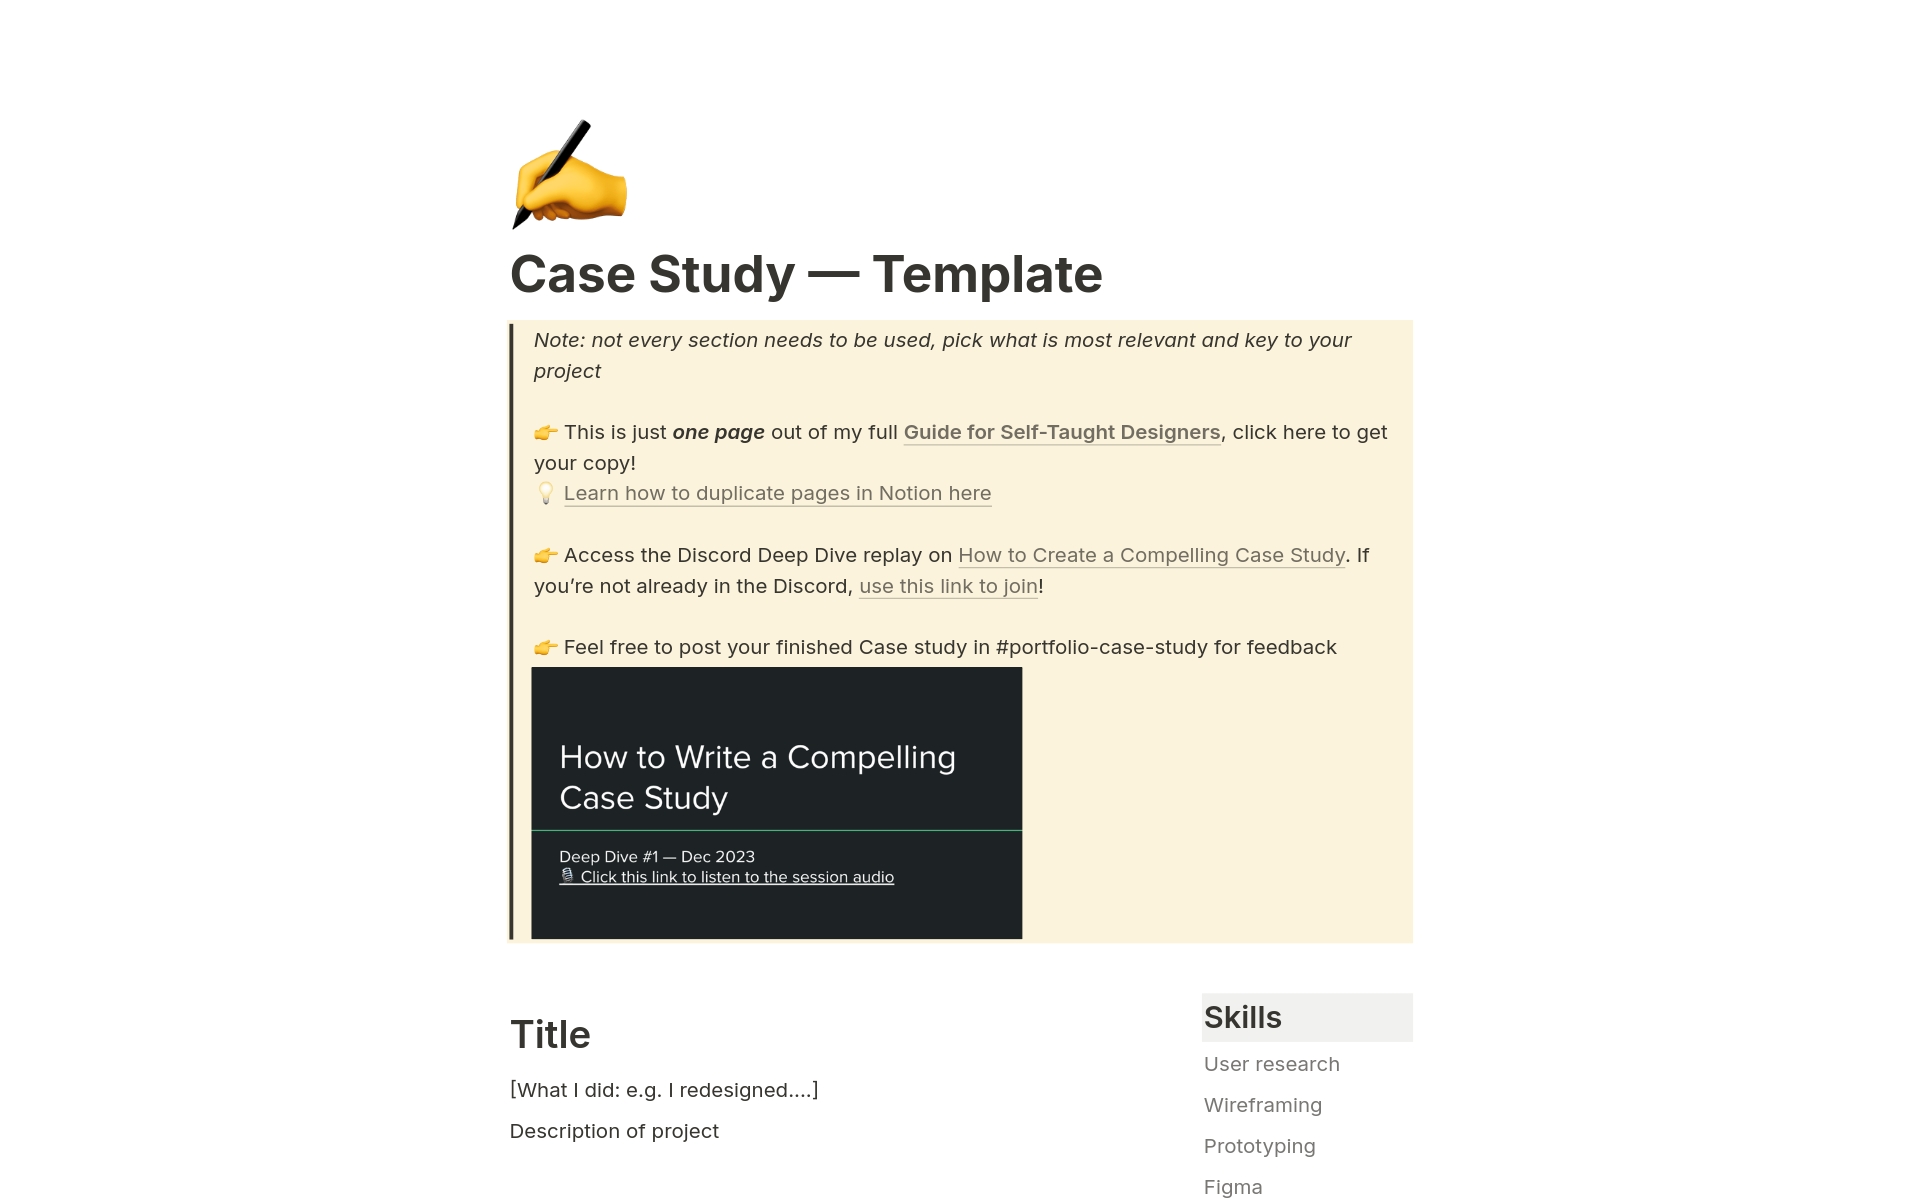 Create a simple, case study optimised for story telling and highlighting your project.